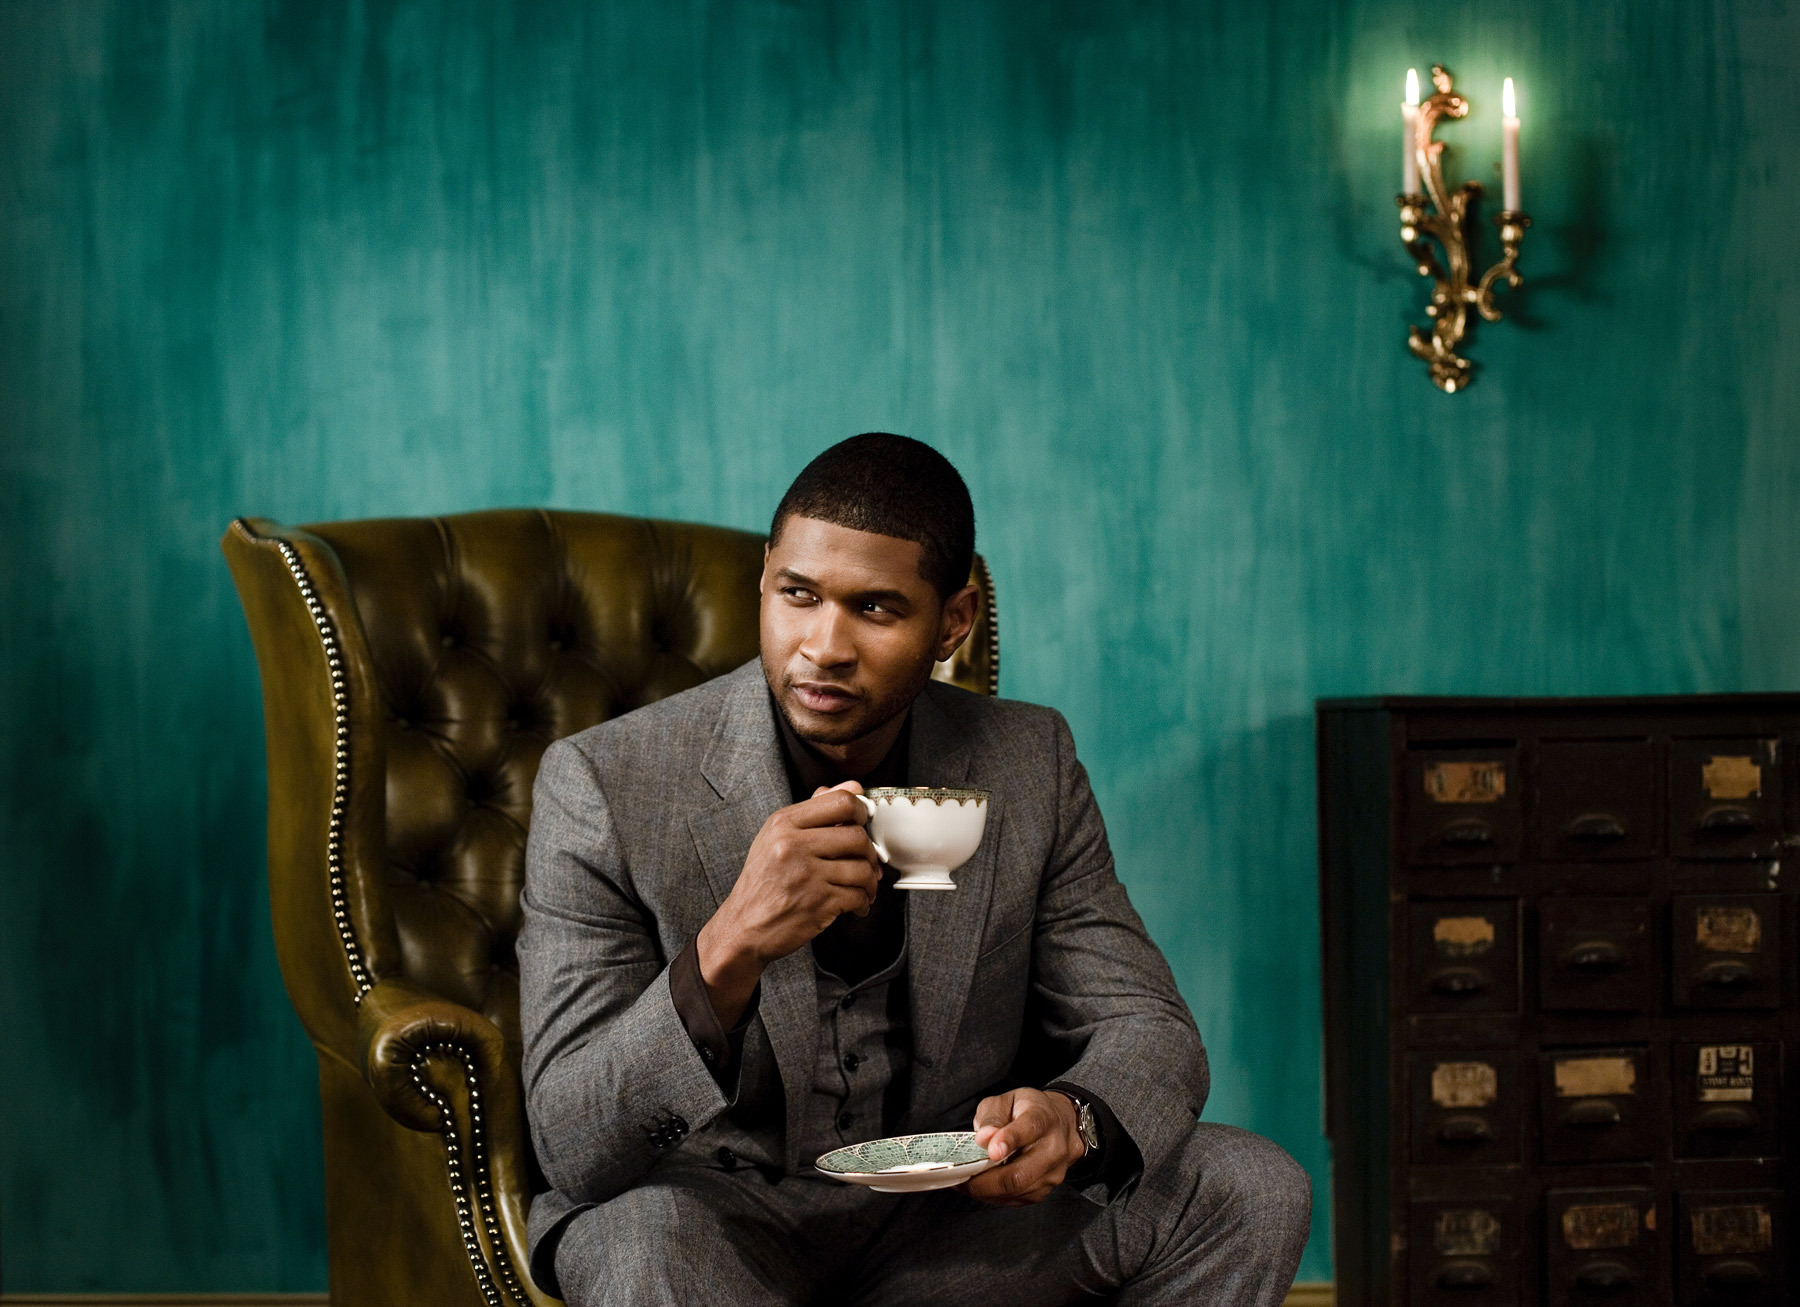 Usher HD Wallpapers - HD Wallpapers Backgrounds of Your Choice